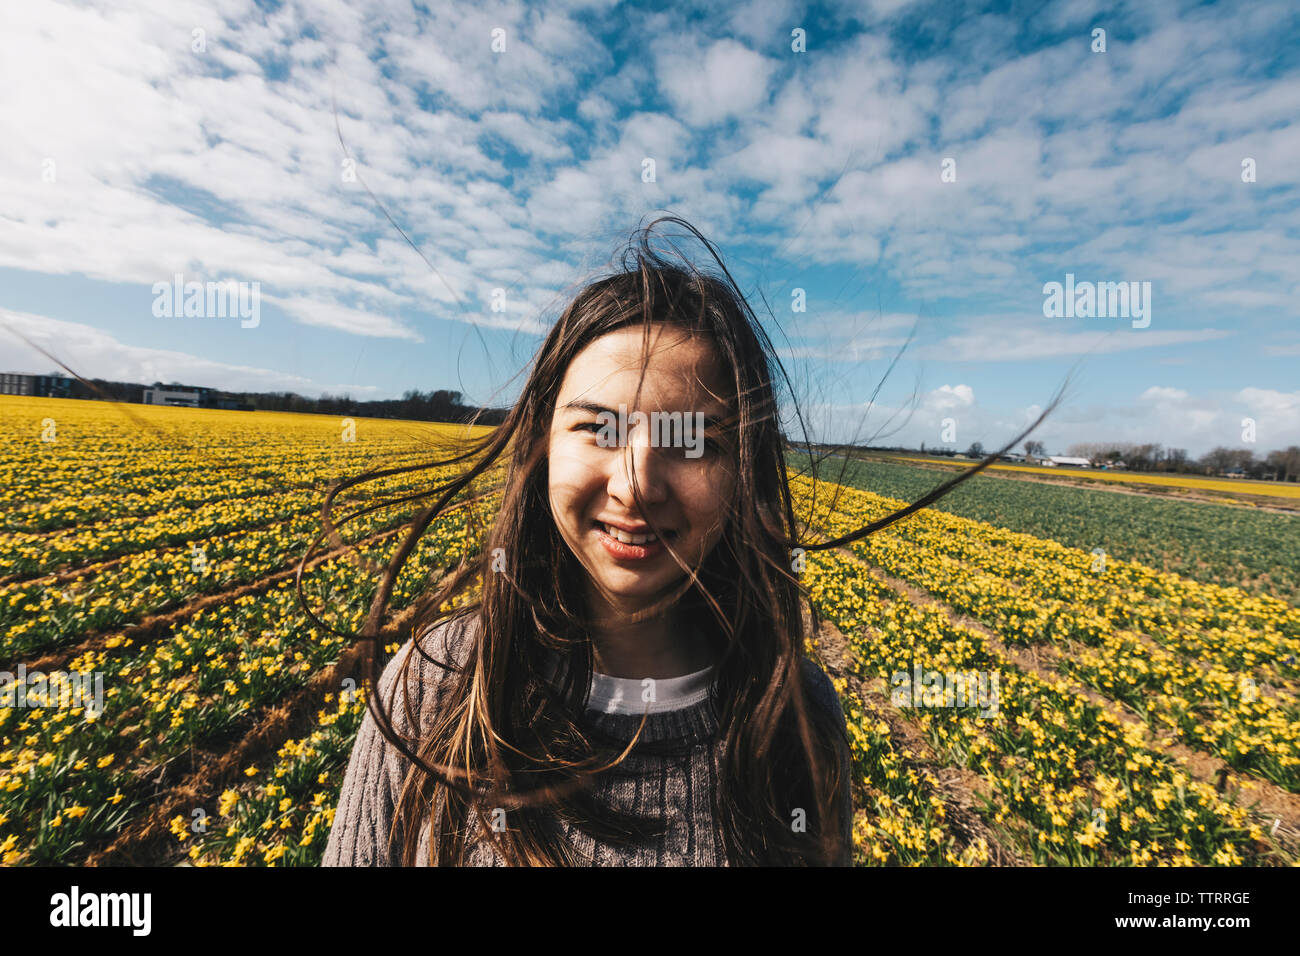 Wind blowing in long hair of woman standing on country field. Stock Photo